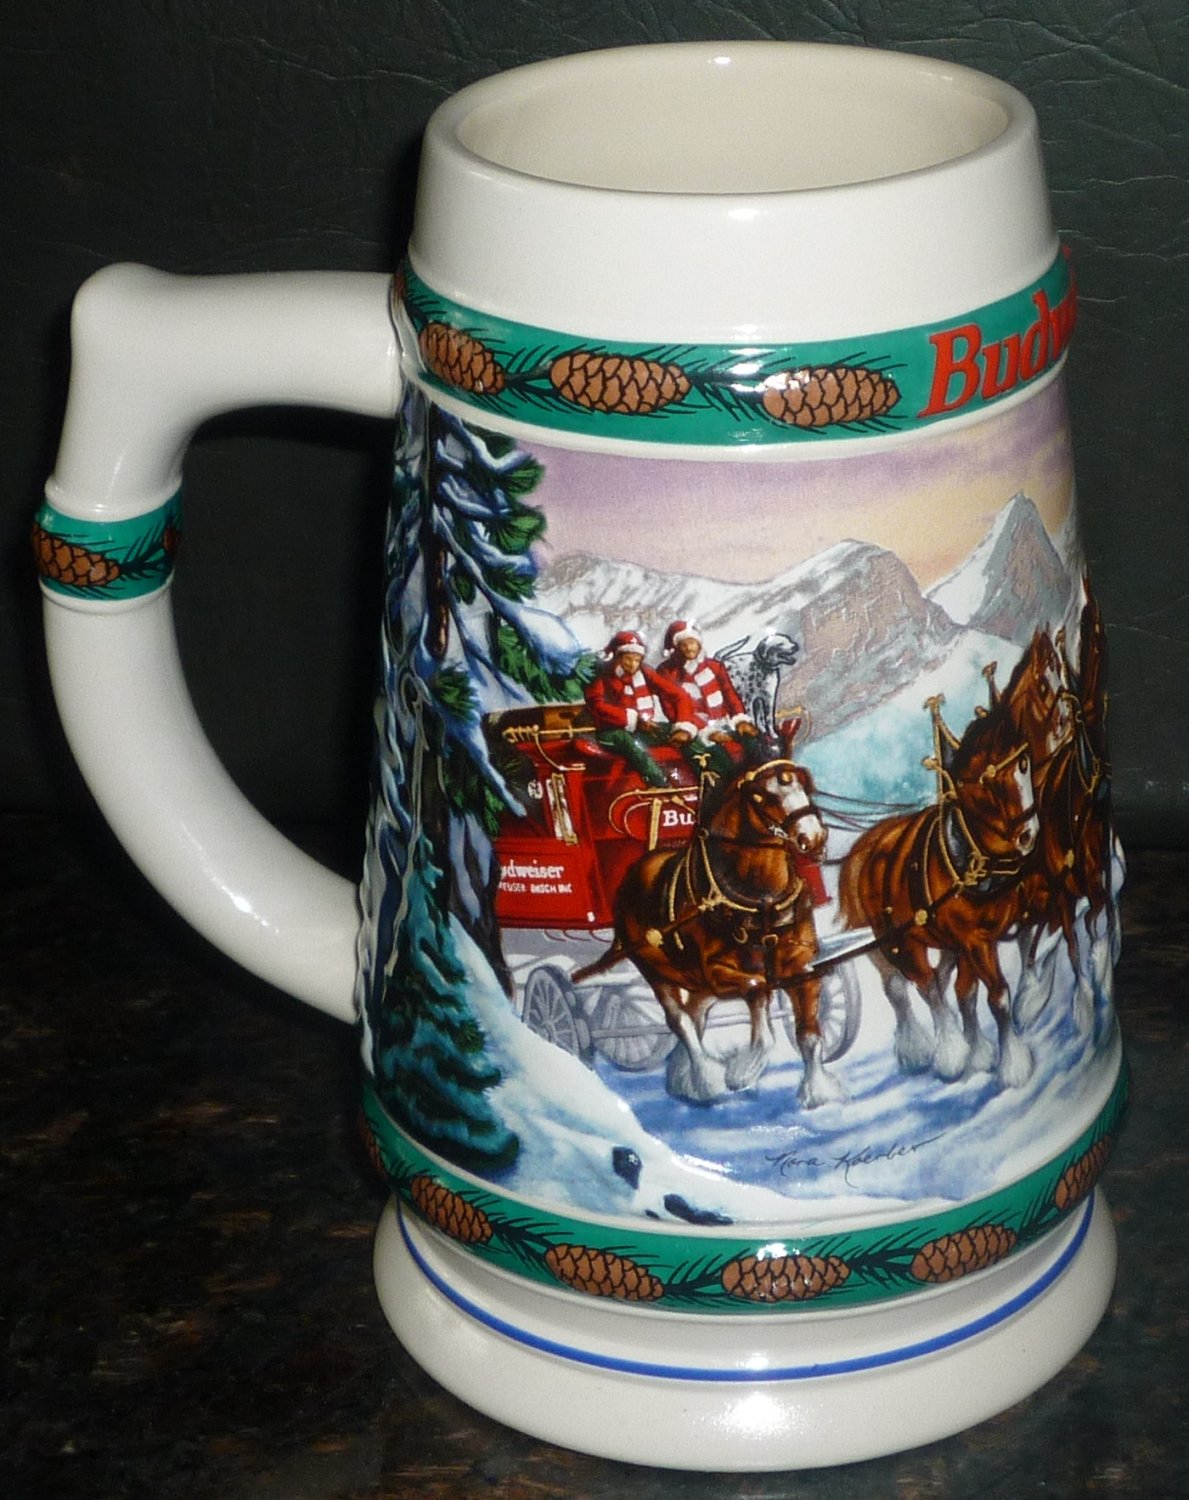 1993 BUDWEISER HOLIDAY COLLECTION STEIN CERAMARTE BRAZIL 'SPECIAL DELIVERY'